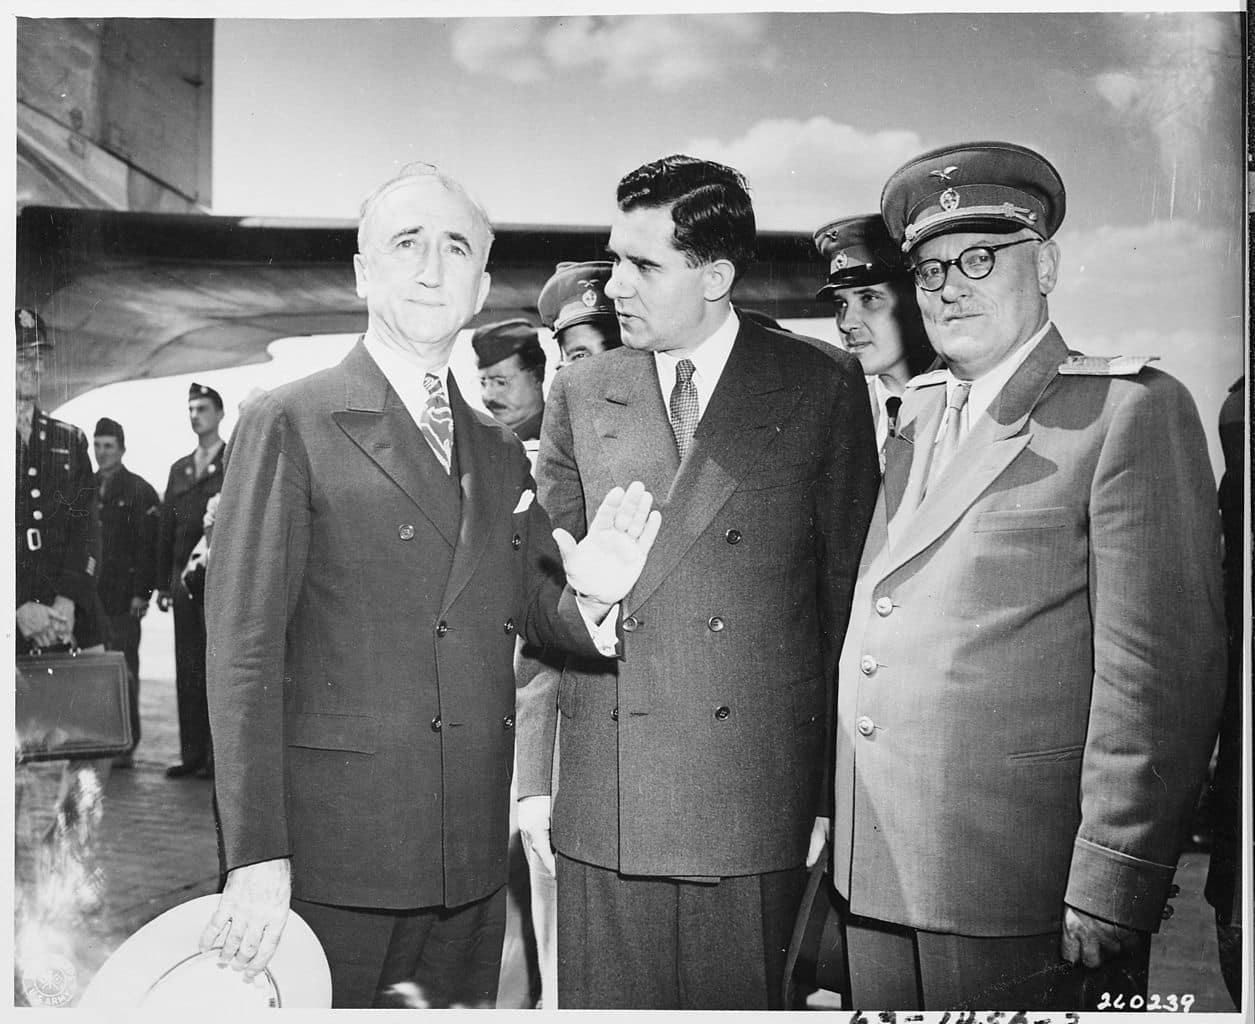 The Potsdam Conference - July 27th 1945 - Secretary of State James Byrnes (left) - seen here greeting Soviet Ambassador to the United States, Andrei Gromyko (center) - would be an essential part of Truman's negotiating team//Image: US National Archives and Records